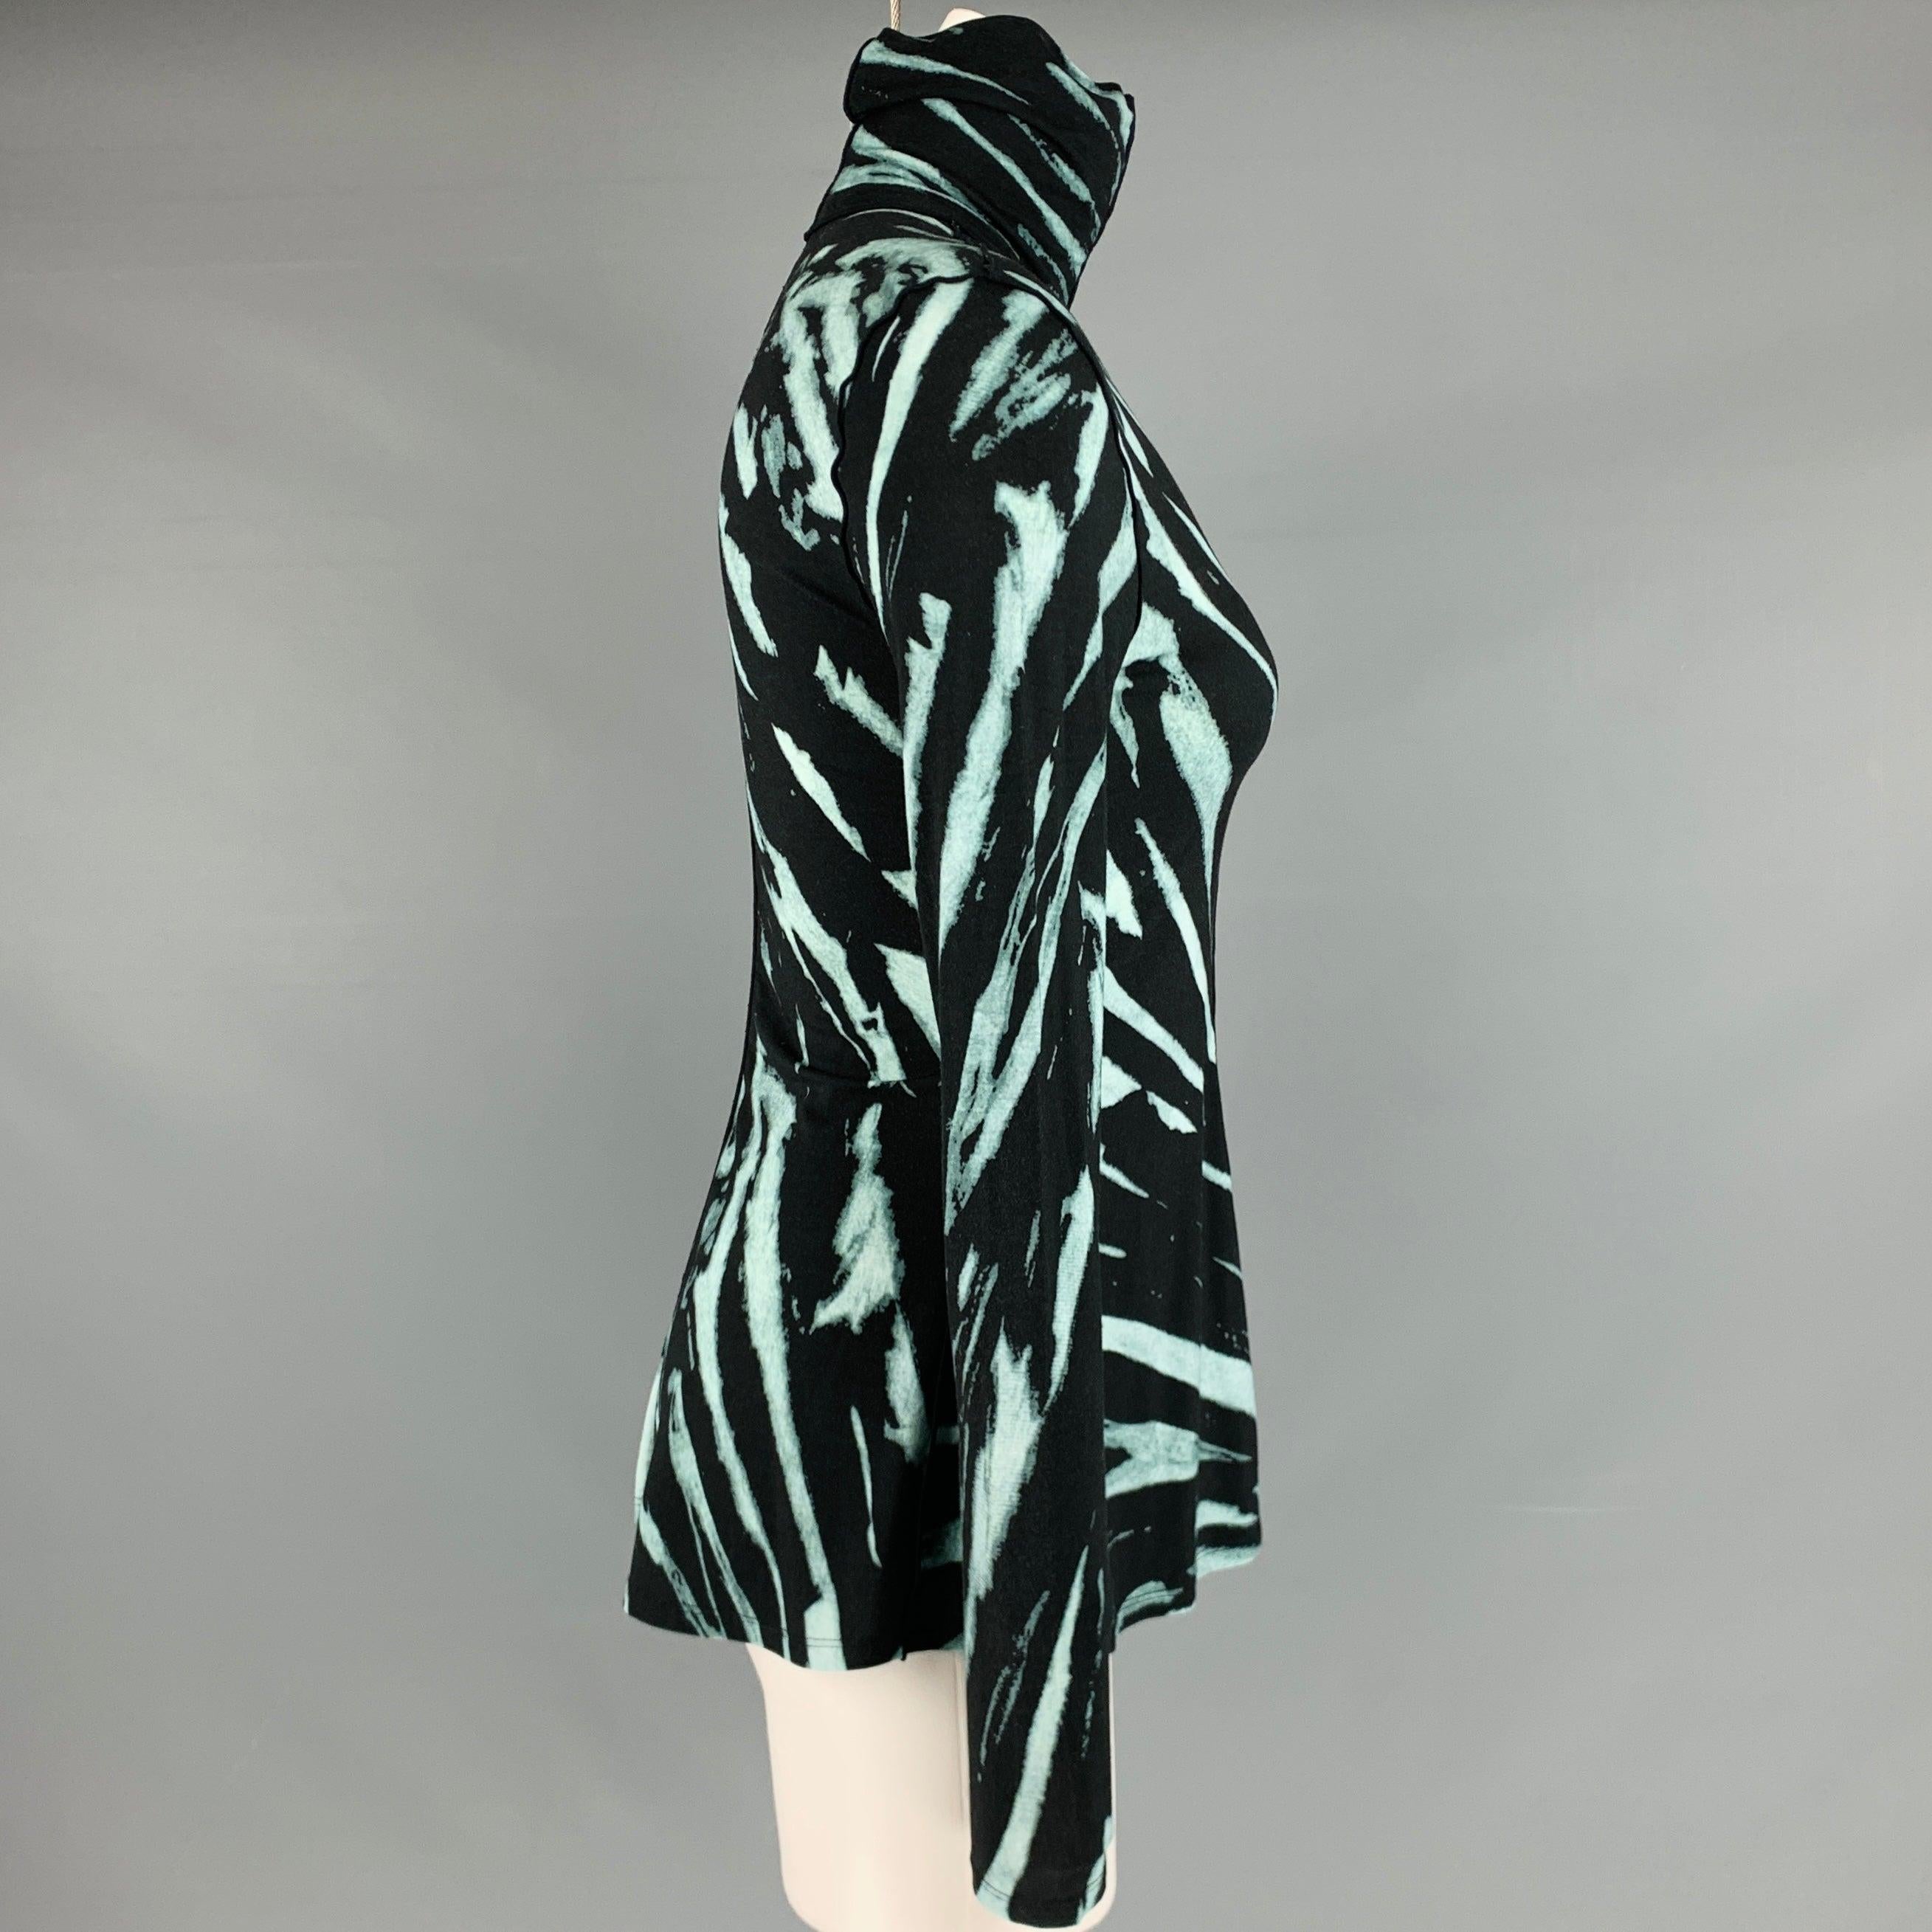 PROENZA SCHOULER Size XS Black Green Rayon Blend Marbled Casual Top In Excellent Condition For Sale In San Francisco, CA